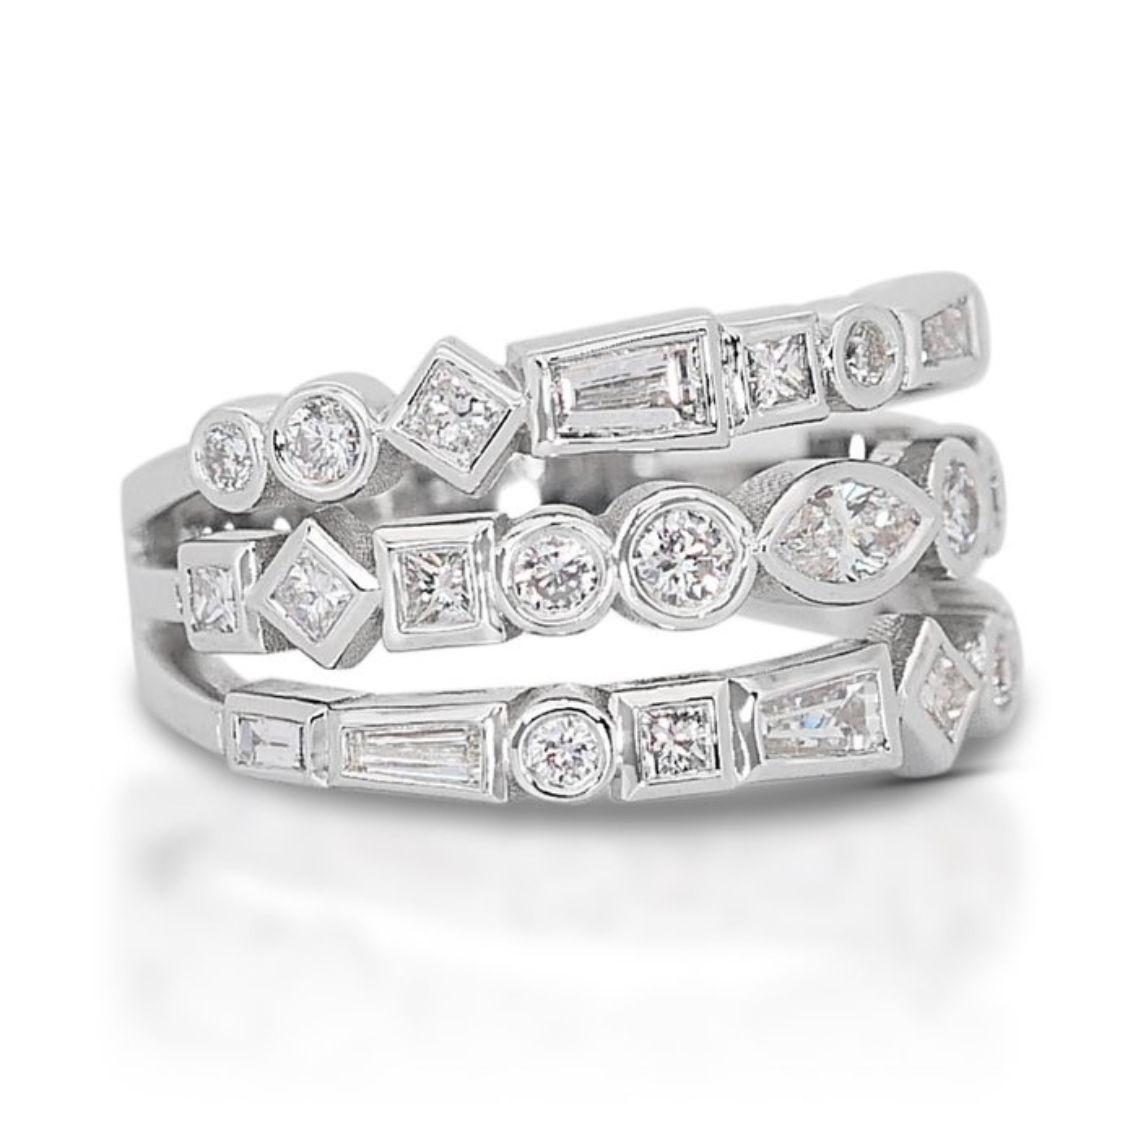 Adding to the ring's brilliance is a vibrant ensemble of smaller diamonds, showcasing various cuts for a captivating interplay of light. Thirteen round brilliant diamonds, totaling 0.27 carats, flank the marquise with their classic sparkle. Eleven